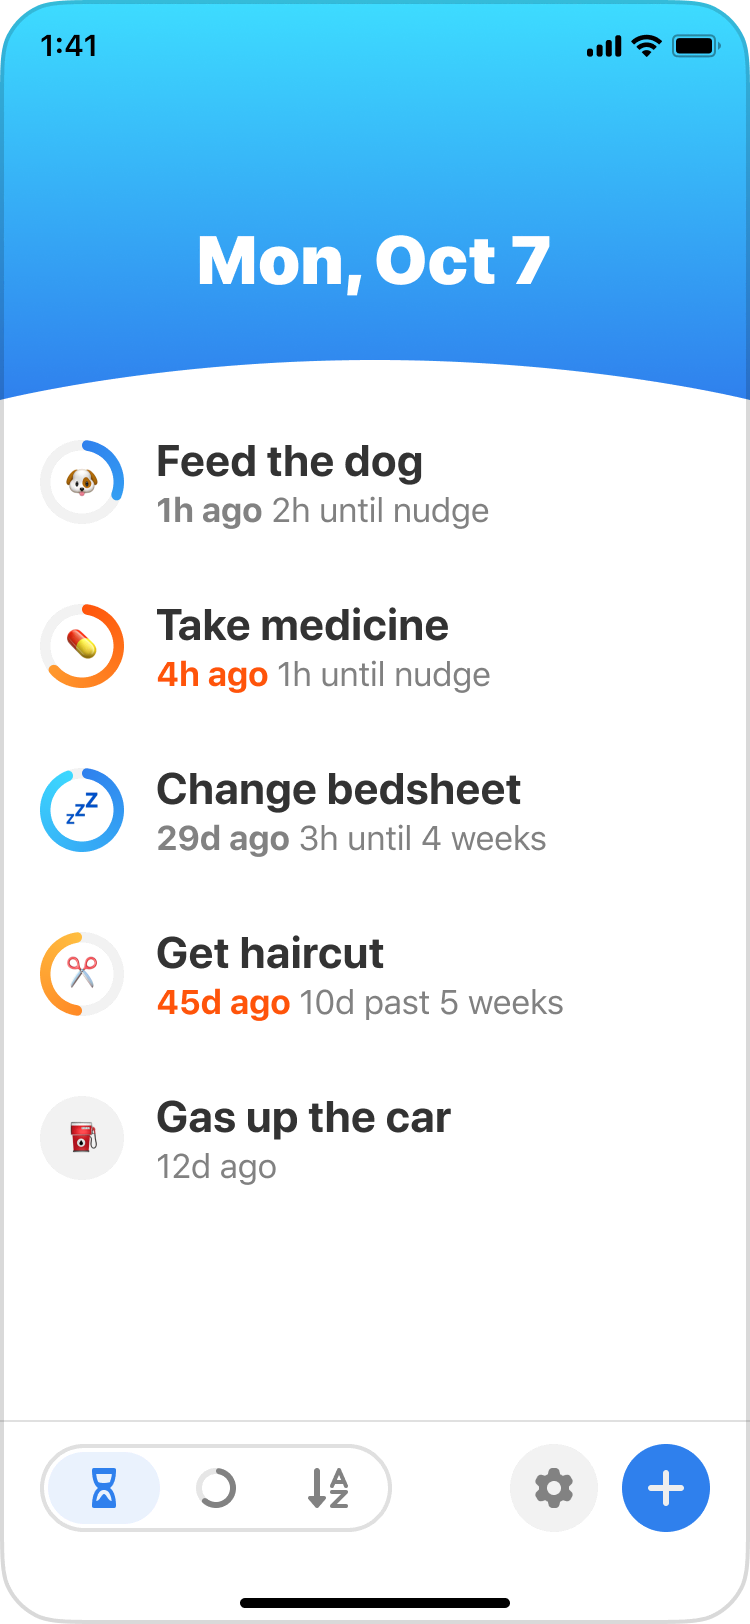 Mock of the home screen with “Mon, Oct 7” in a header section, and a list of tasks in the body with an activity ring for each of them